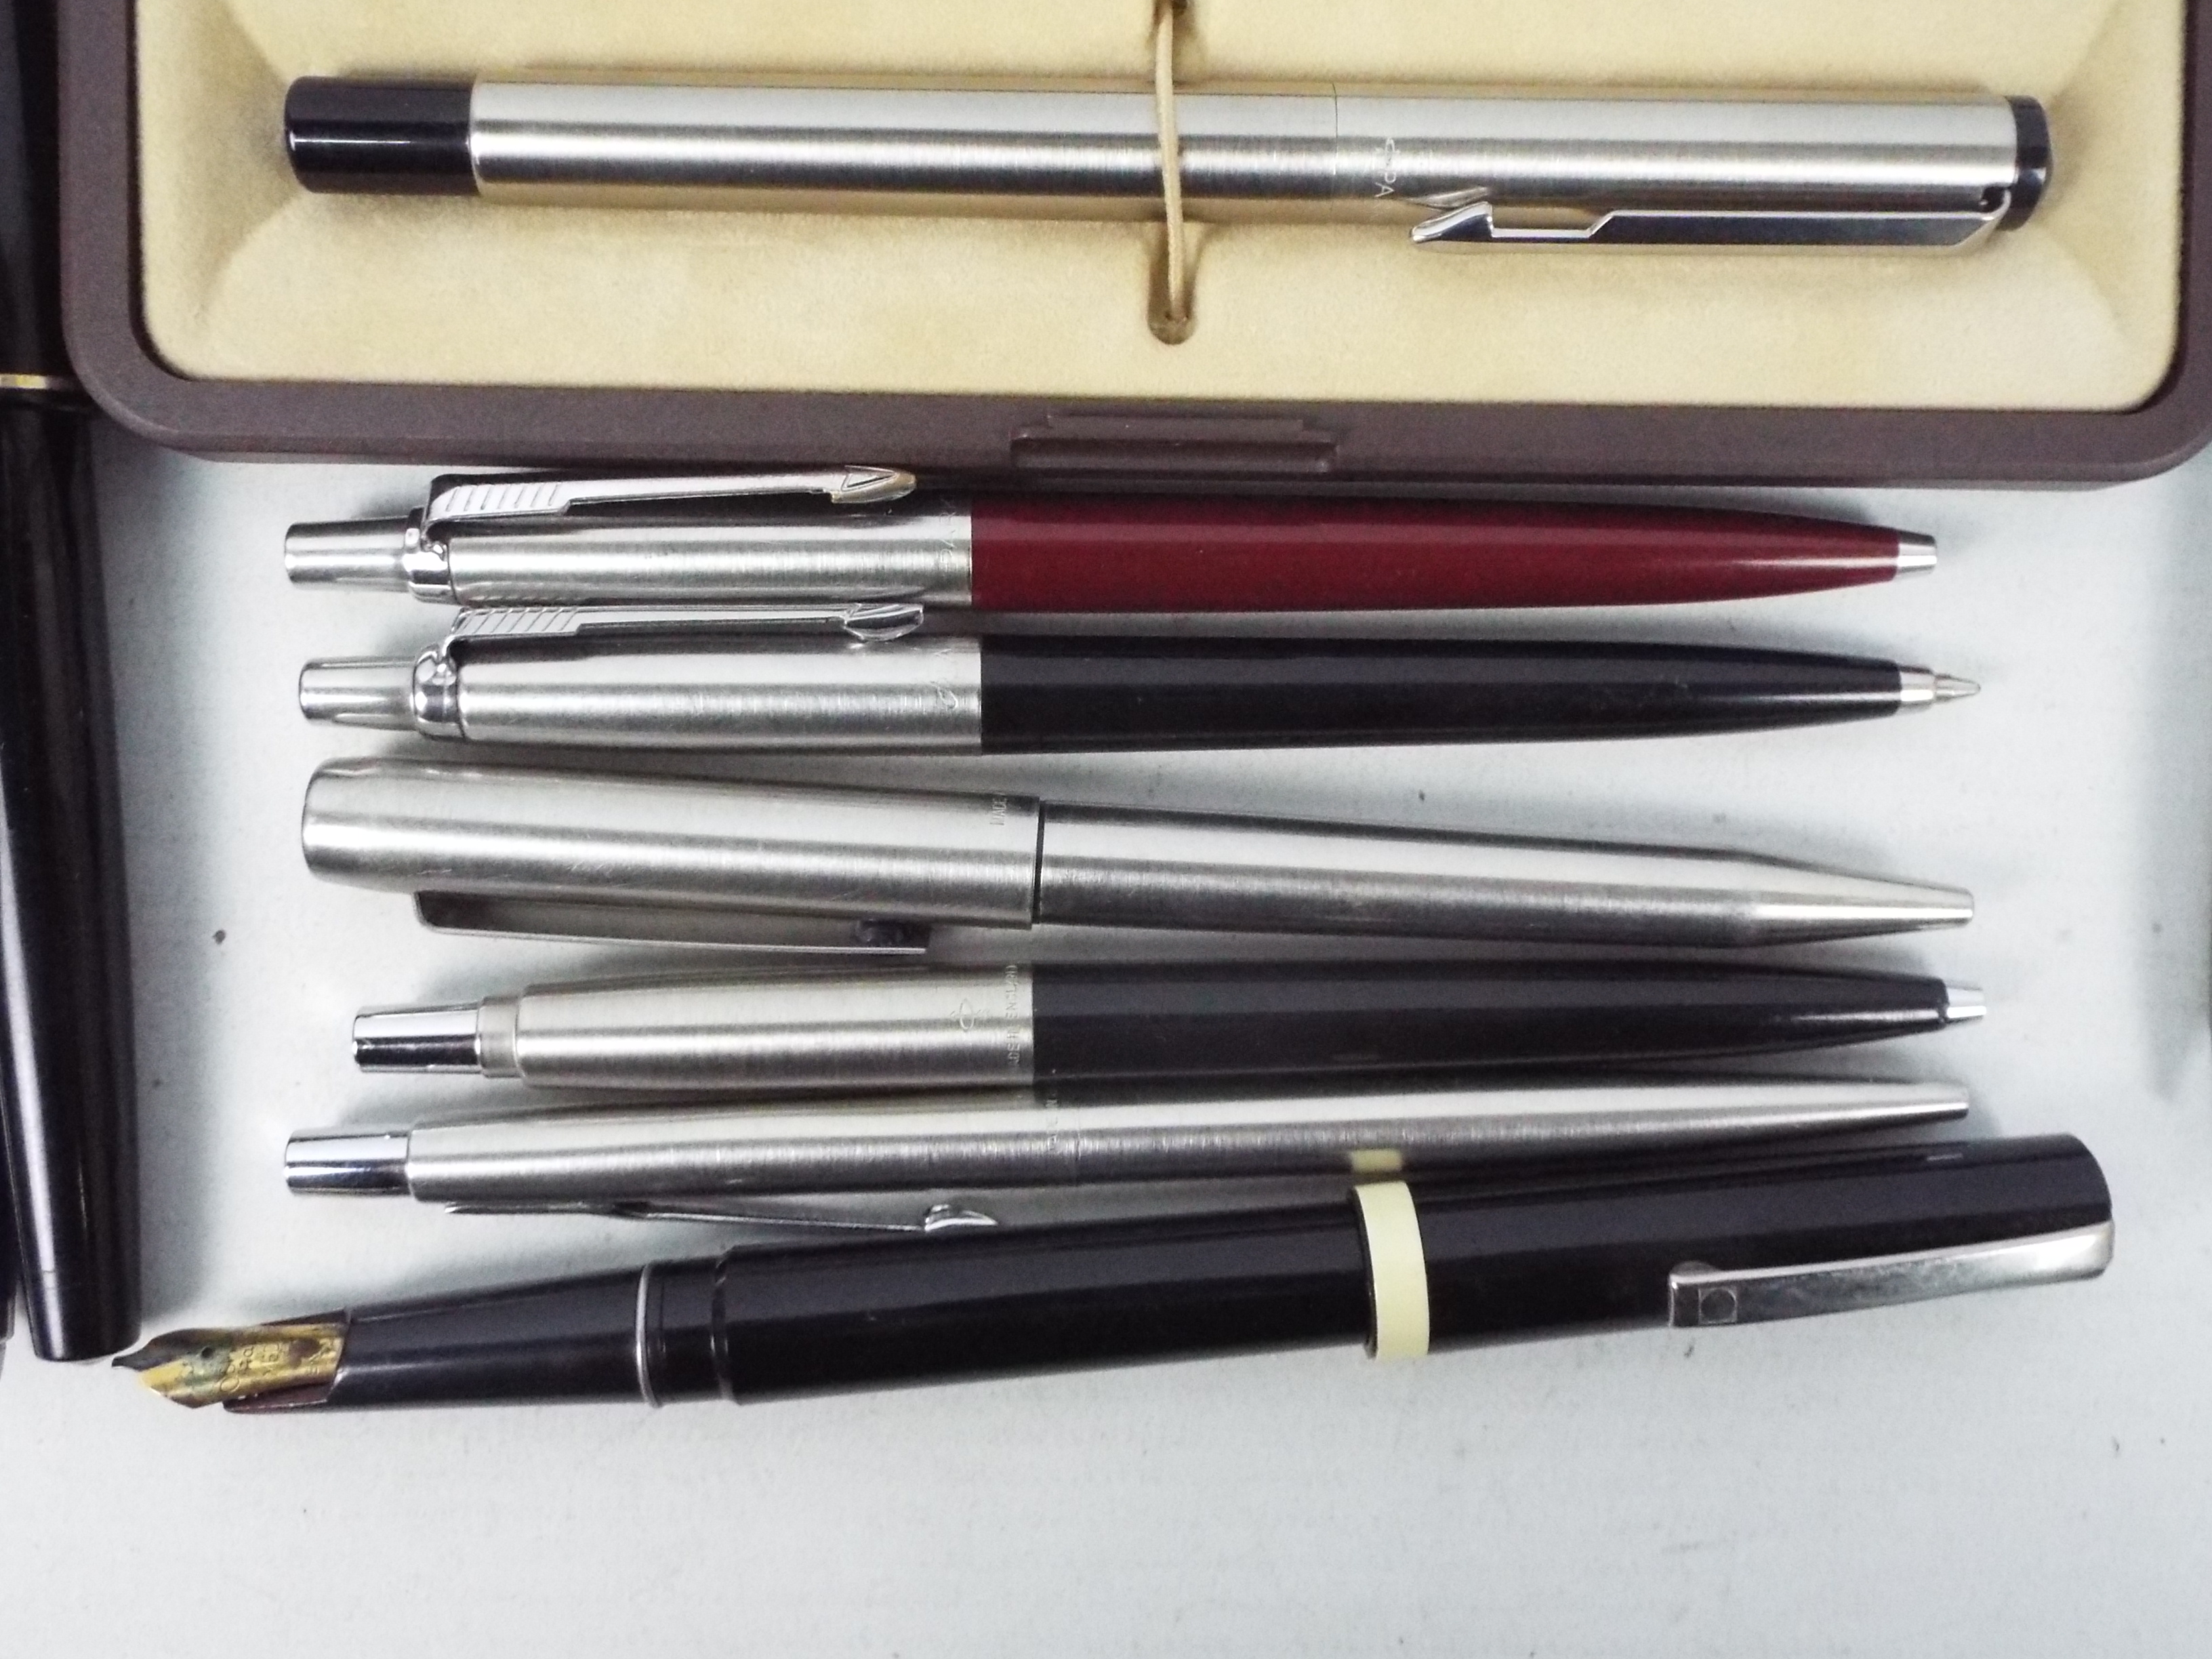 A collection of pens, predominantly Parker to include a Parker 17 and a propelling pencil. - Image 2 of 4